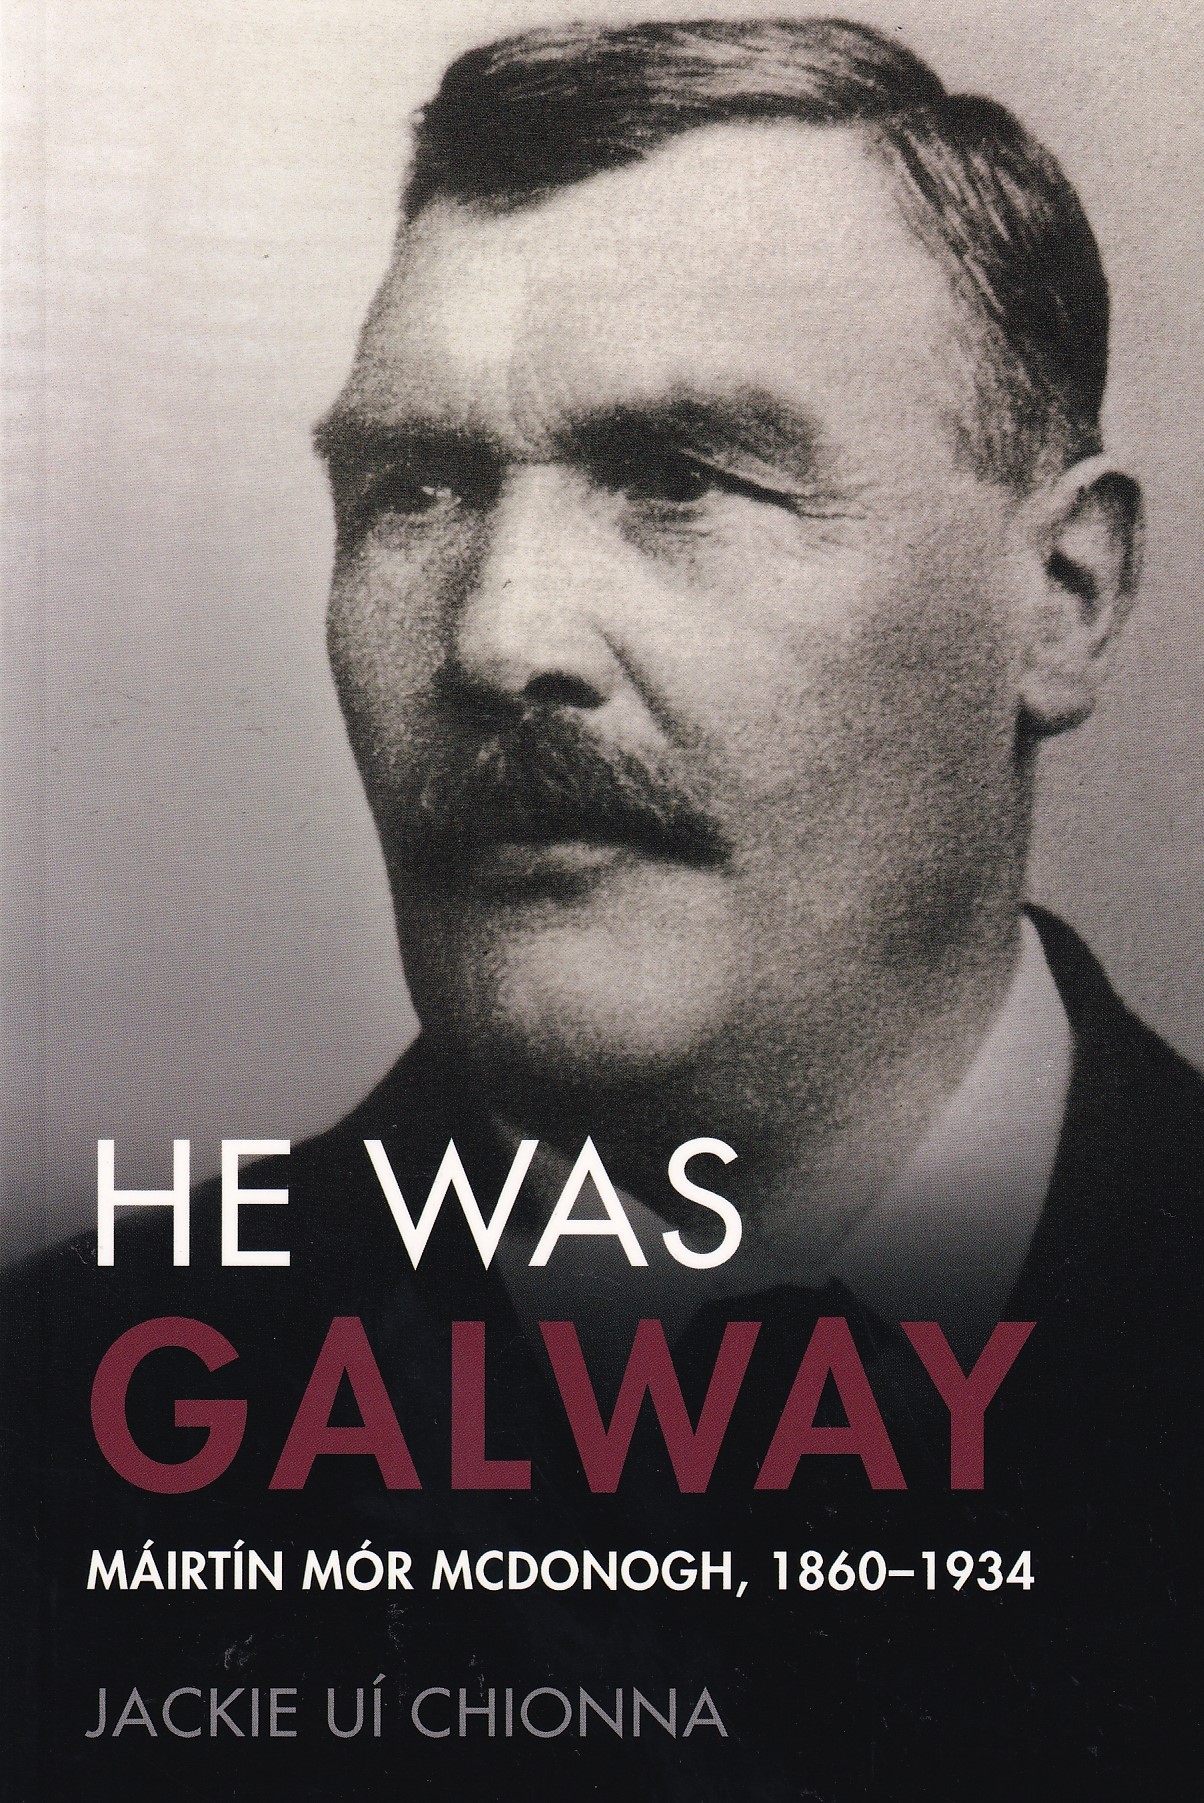 He was Galway: Mairtin Mor McDonogh, 1860-1934 | Jackie Ui Chionna | Charlie Byrne's